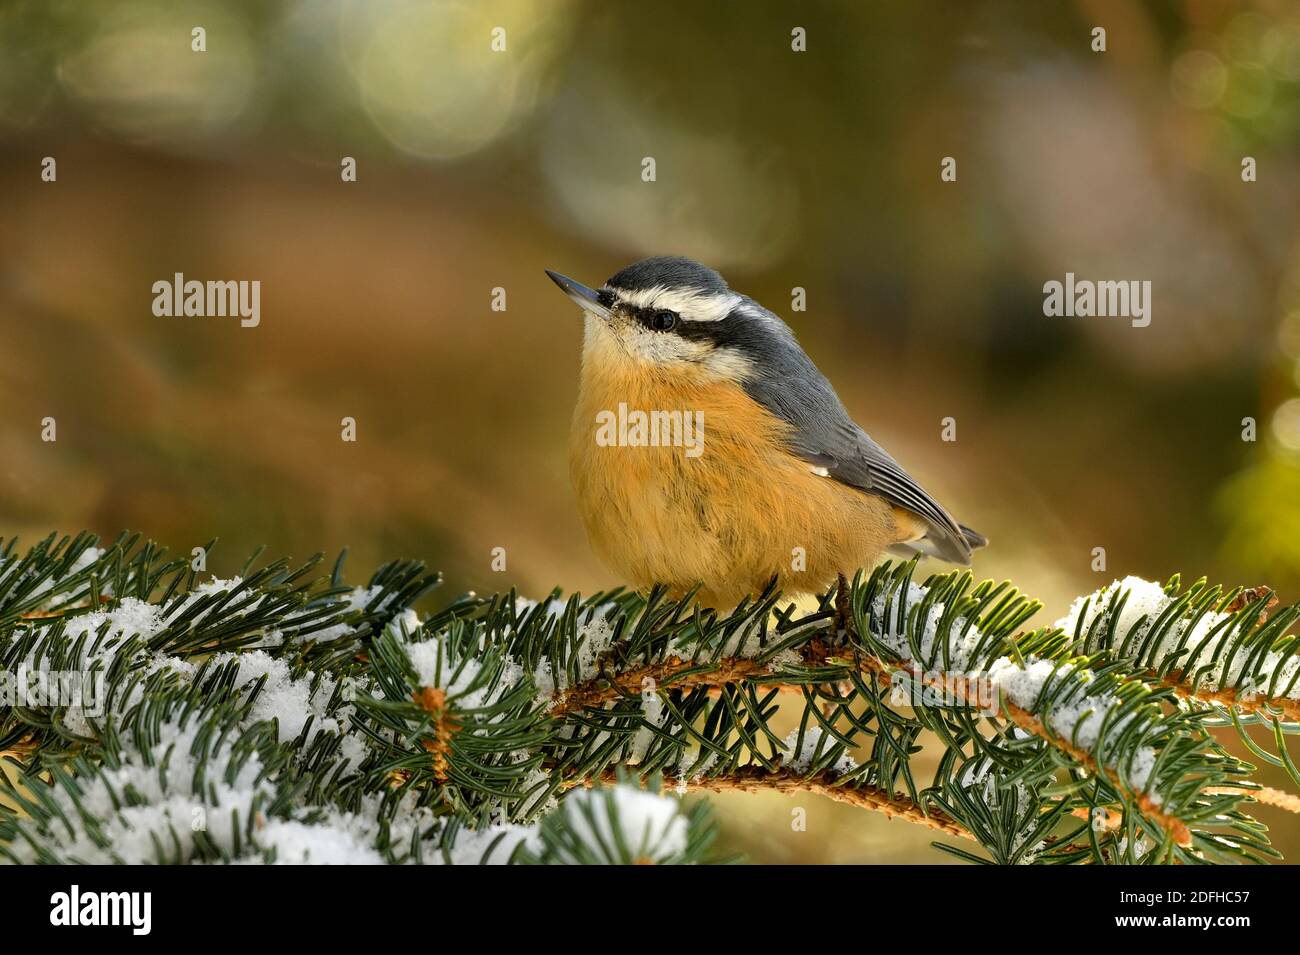 A Red-breasted Nuthatch bird 'Sitta canadensis', perched on a snowy green spruce tree branch in the warm sunset light in rural Alberta Canada Stock Photo